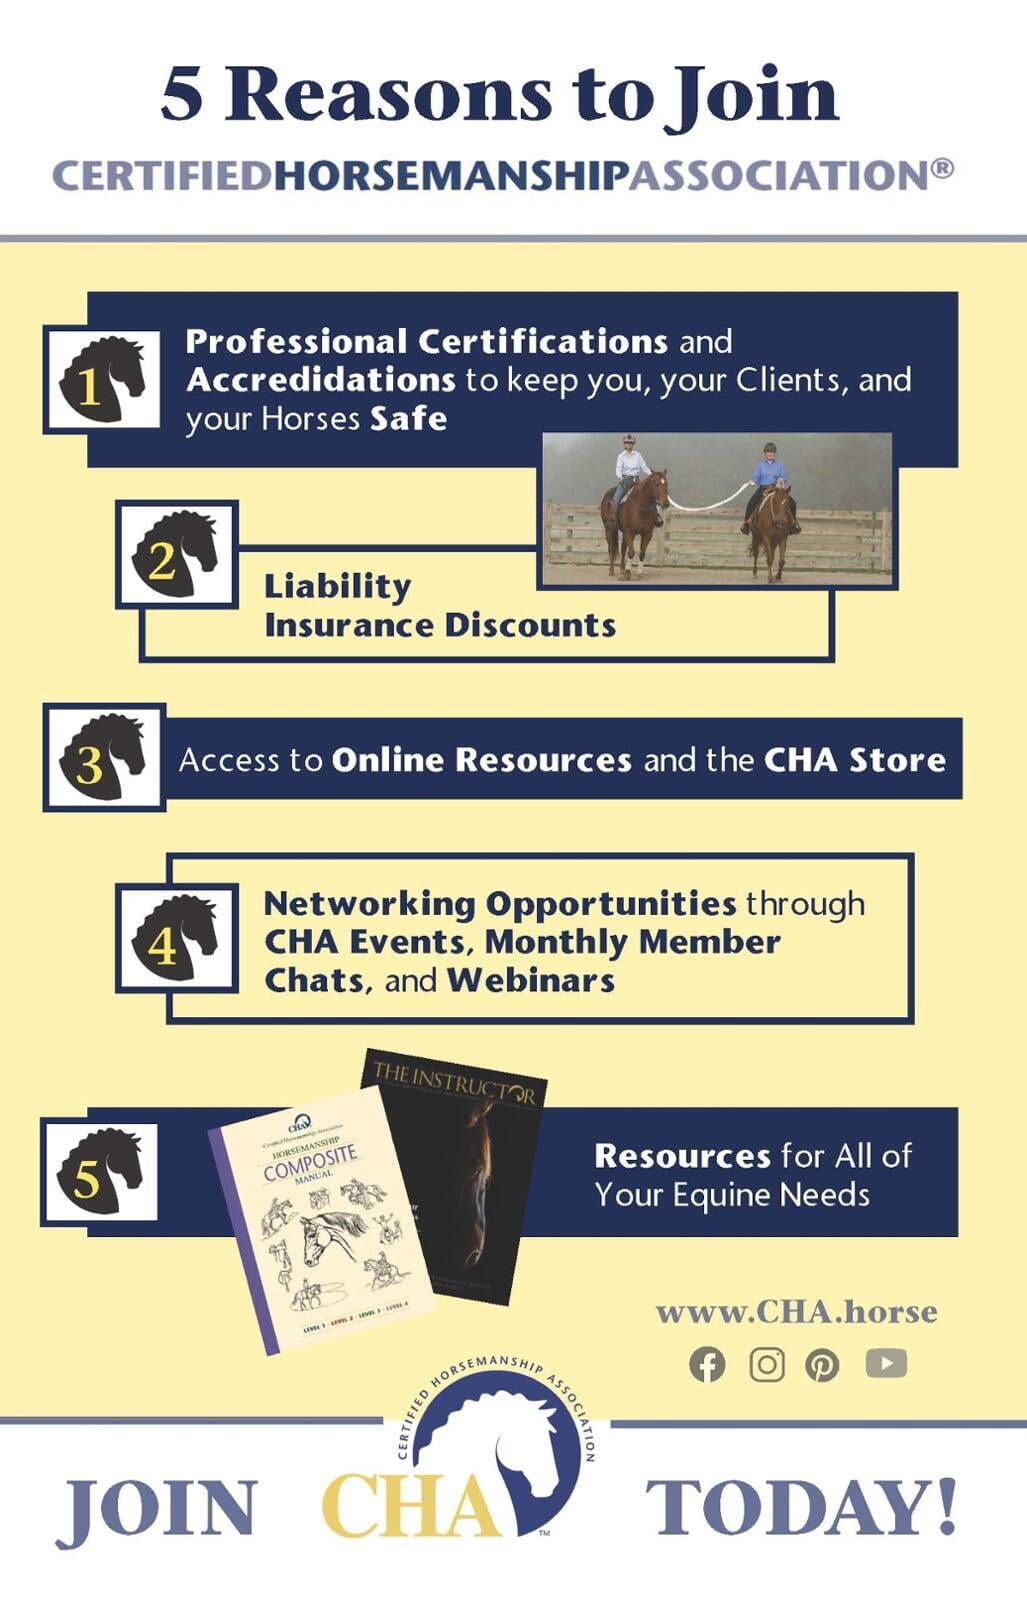 5 Reasons to Join Certified Horsemanship Association Magazine Ad